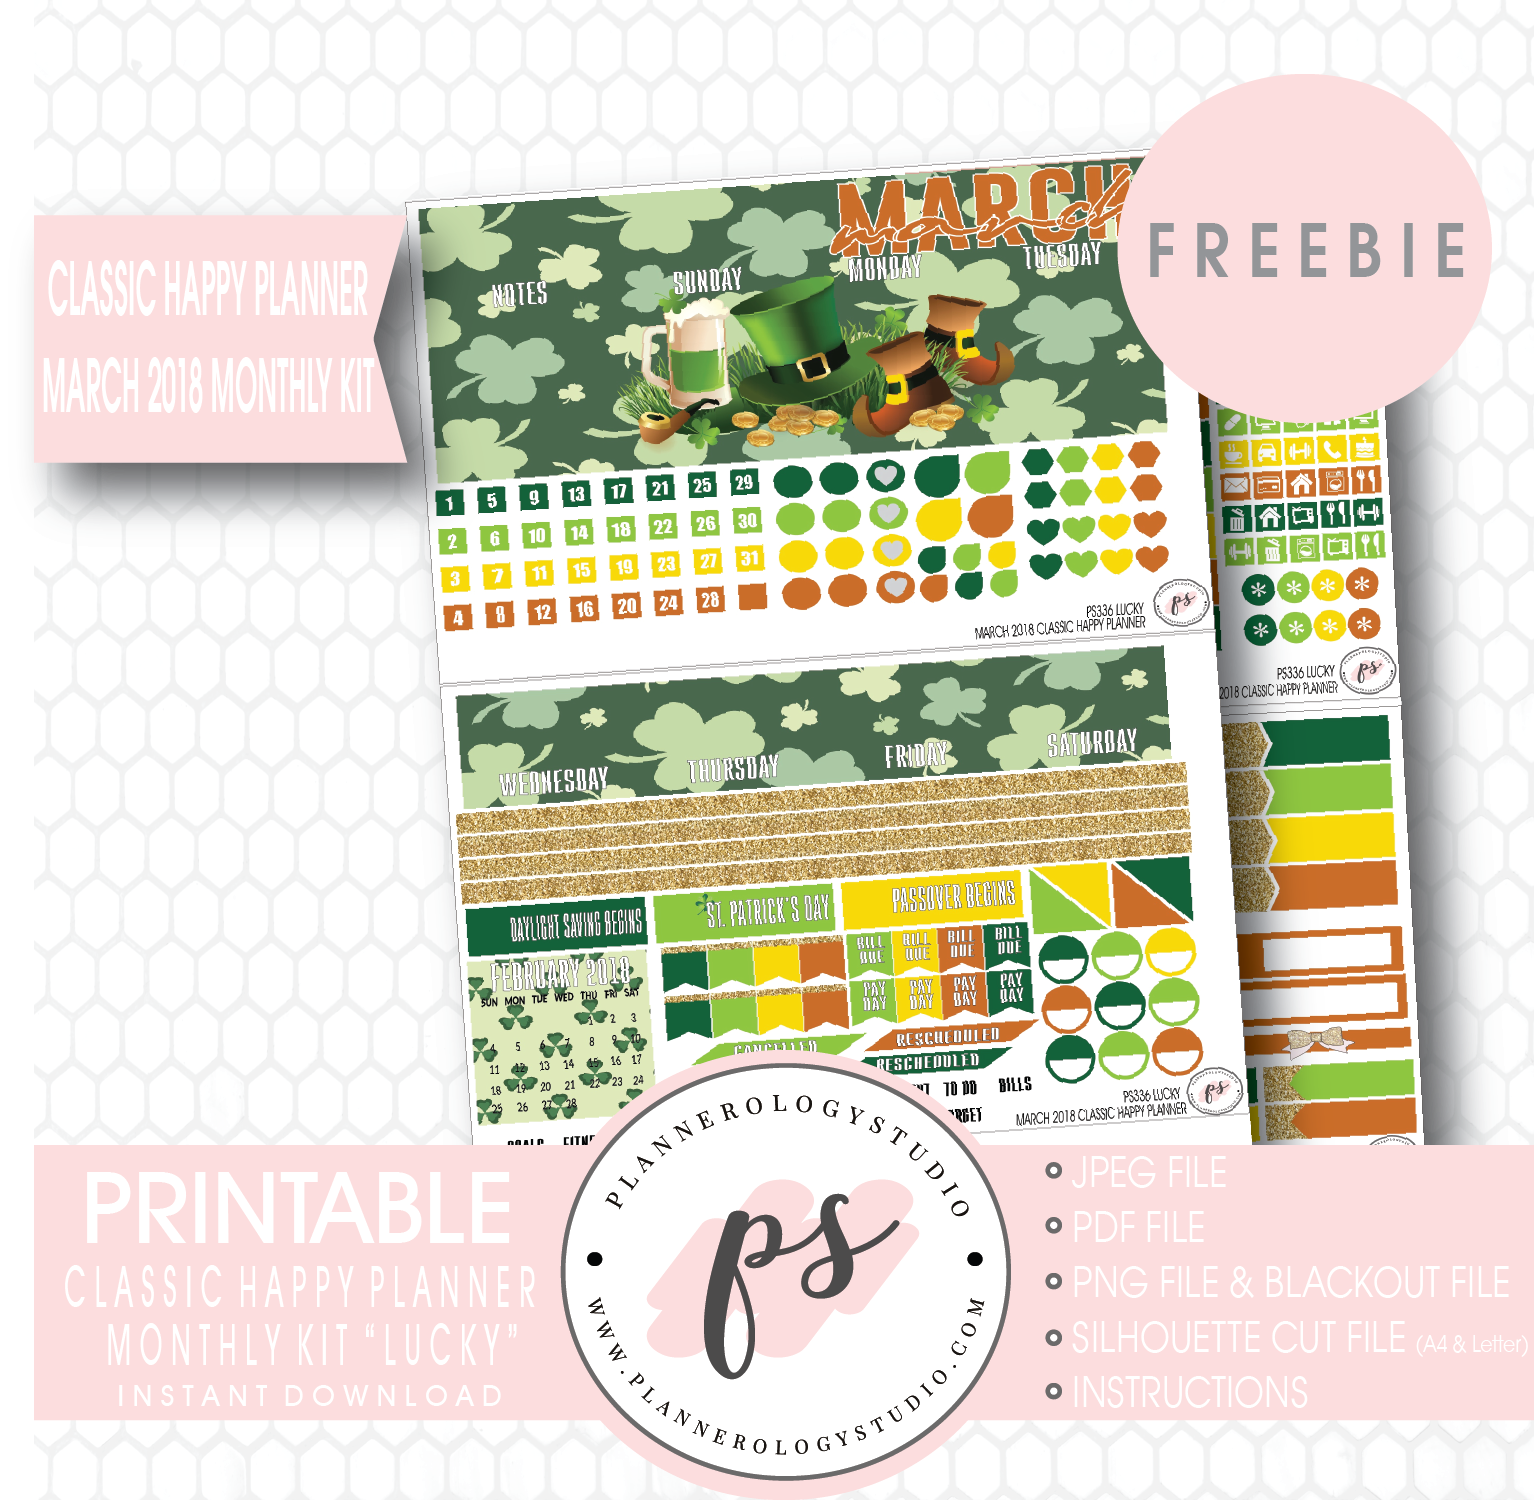 Lucky St Patrick's Day Classic Happy Planner March 2018 Monthly Kit Digital Printable Planner Stickers (PDF/JPG/PNG/Silhouette Cut File Freebie) - Plannerologystudio